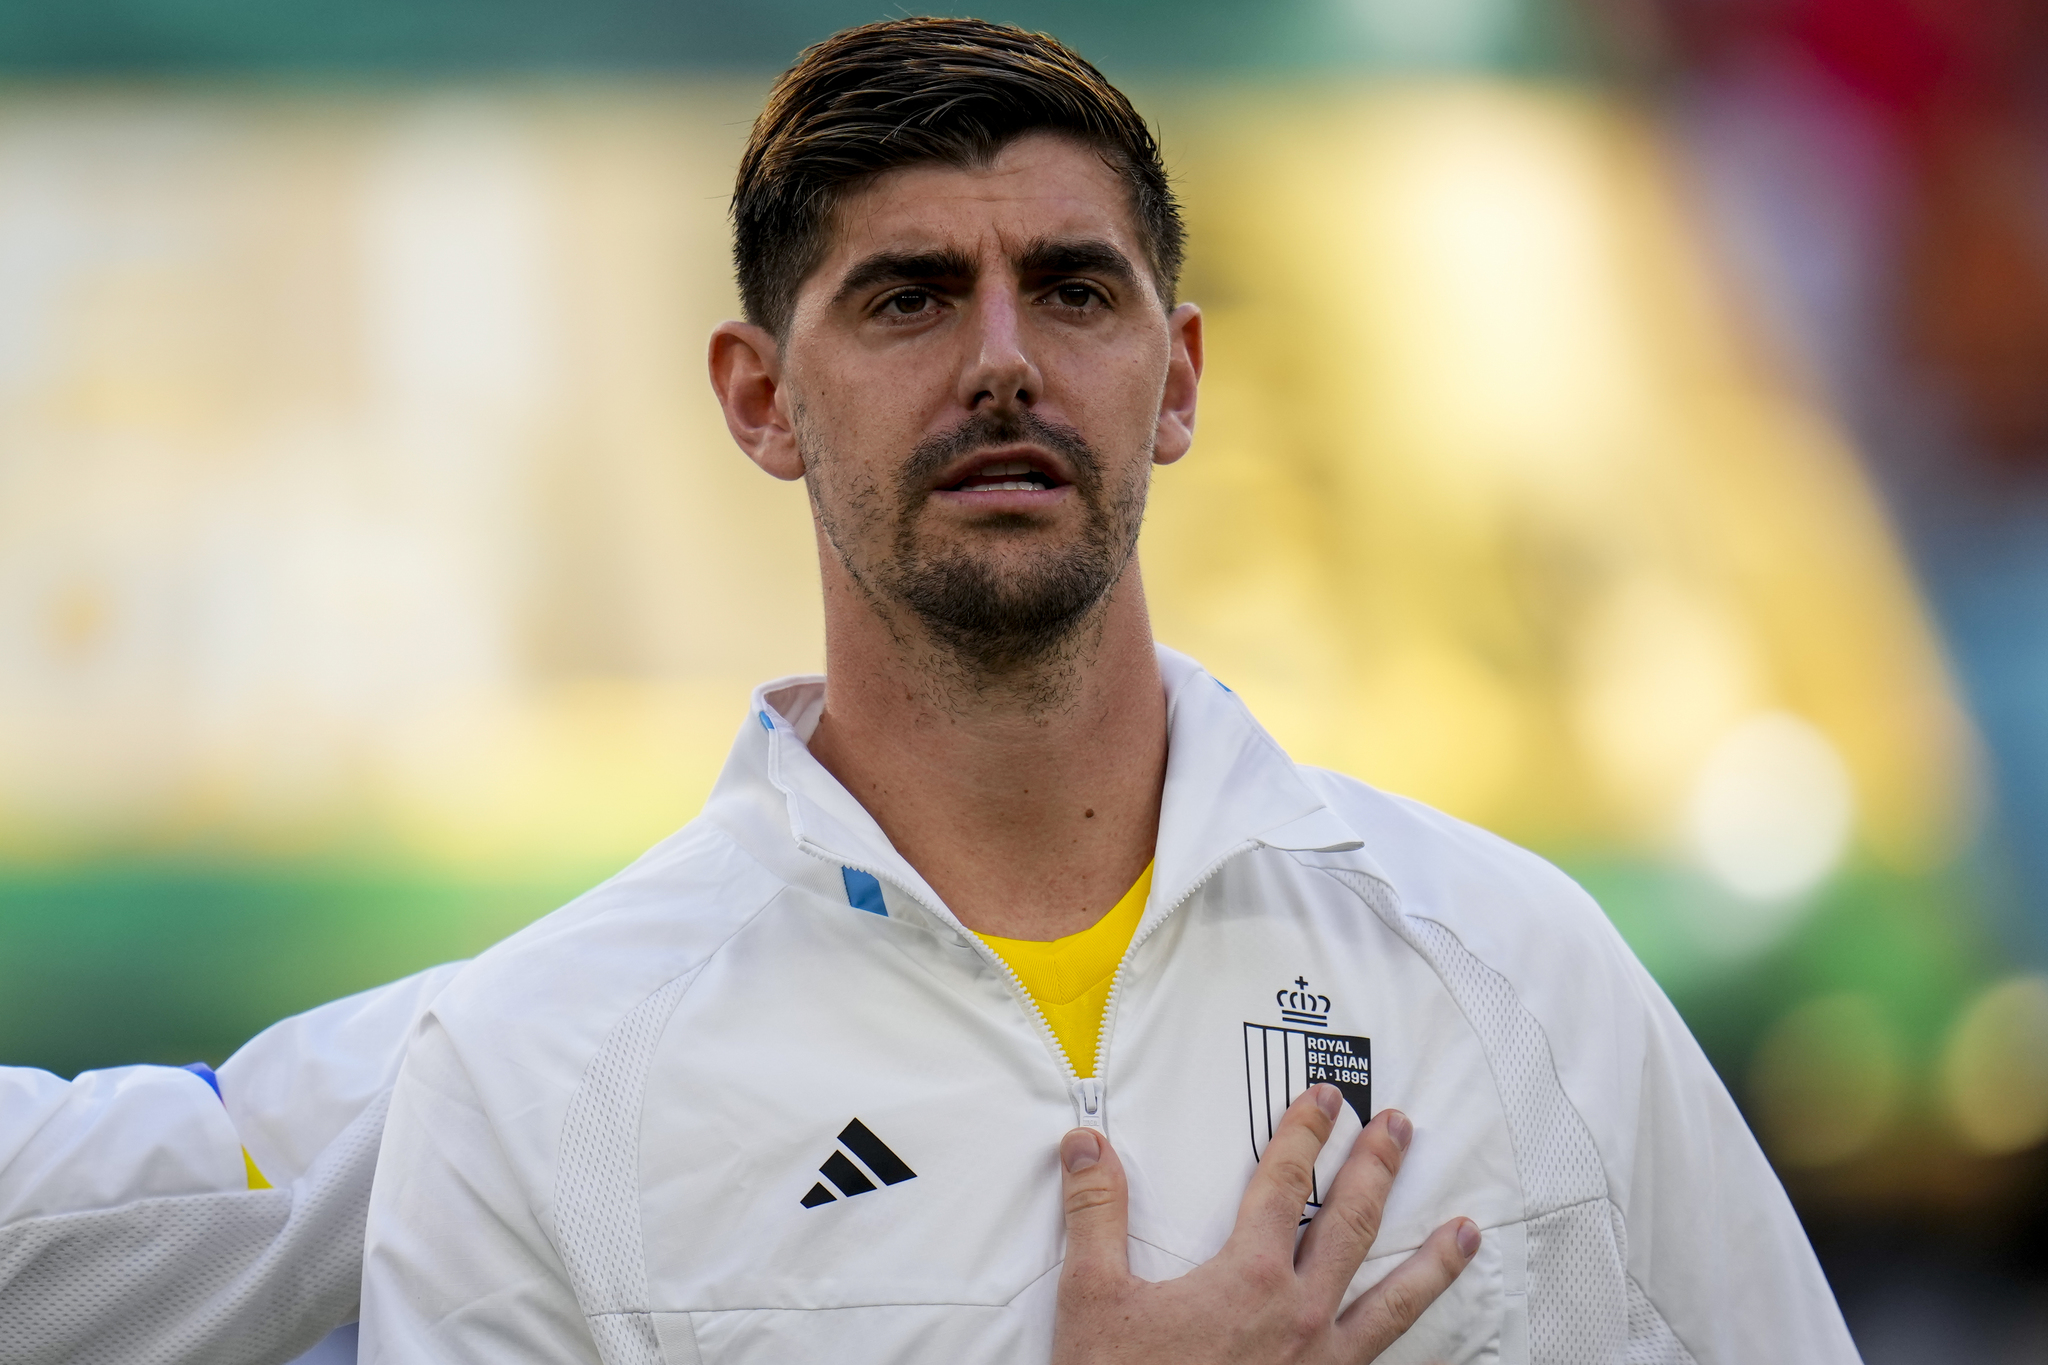  lt;HIT gt;Belgium lt;/HIT gt;'s goalkeeper Thibaut Courtois sings his national anthem prior to a World Cup group F soccer match between  lt;HIT gt;Belgium lt;/HIT gt; and  lt;HIT gt;Morocco lt;/HIT gt; at the Al Thumama Stadium in Doha, Qatar, Sunday, Nov. 27, 2022. (AP Photo/Manu Fernandez)